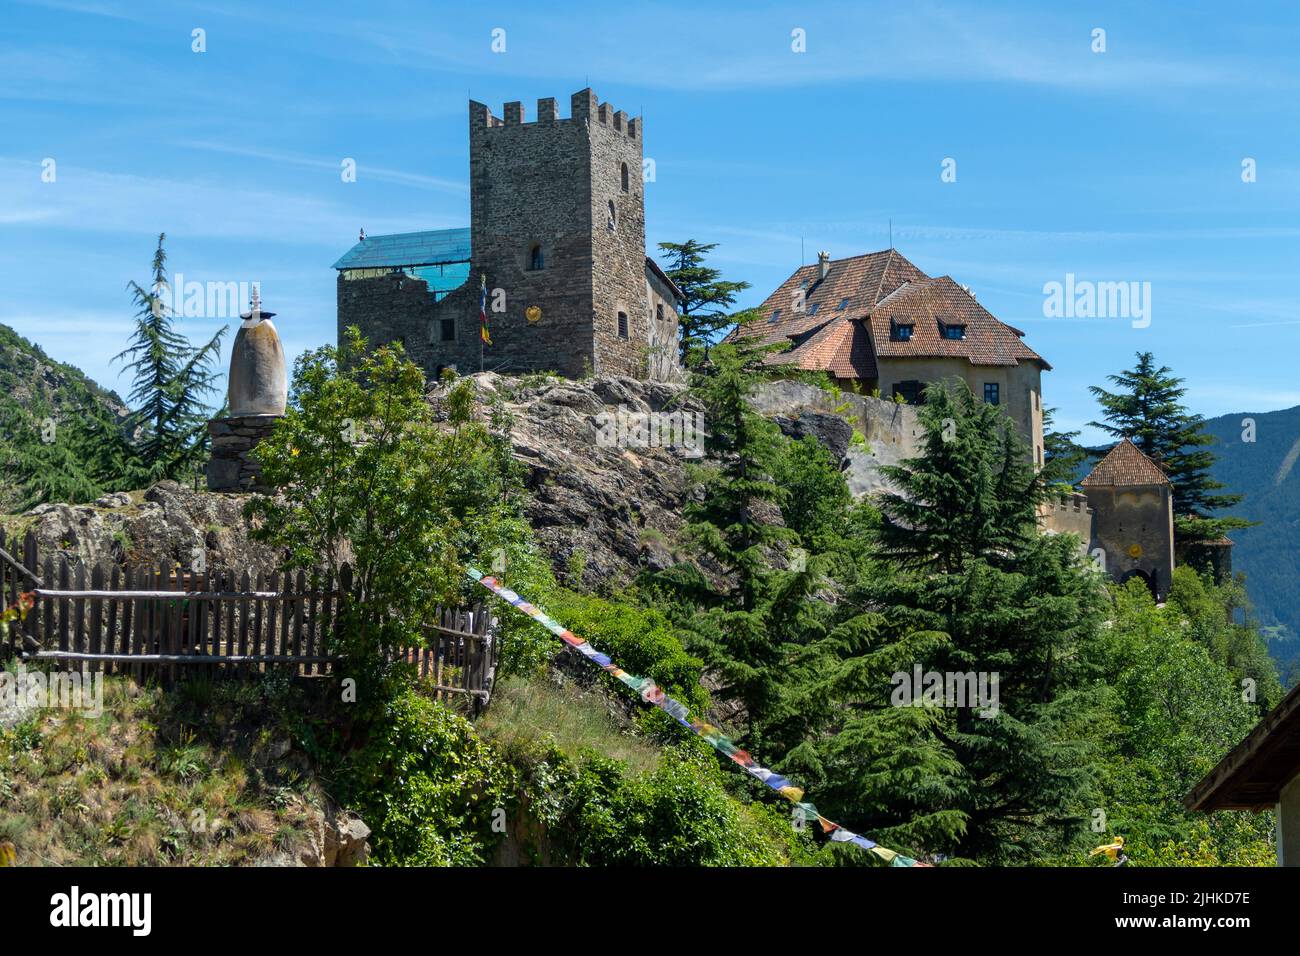 Juval Castle, summer residence & museum of mountaineer Reinhold Messner, Naturns, South Tyrol, Italy. Stock Photo